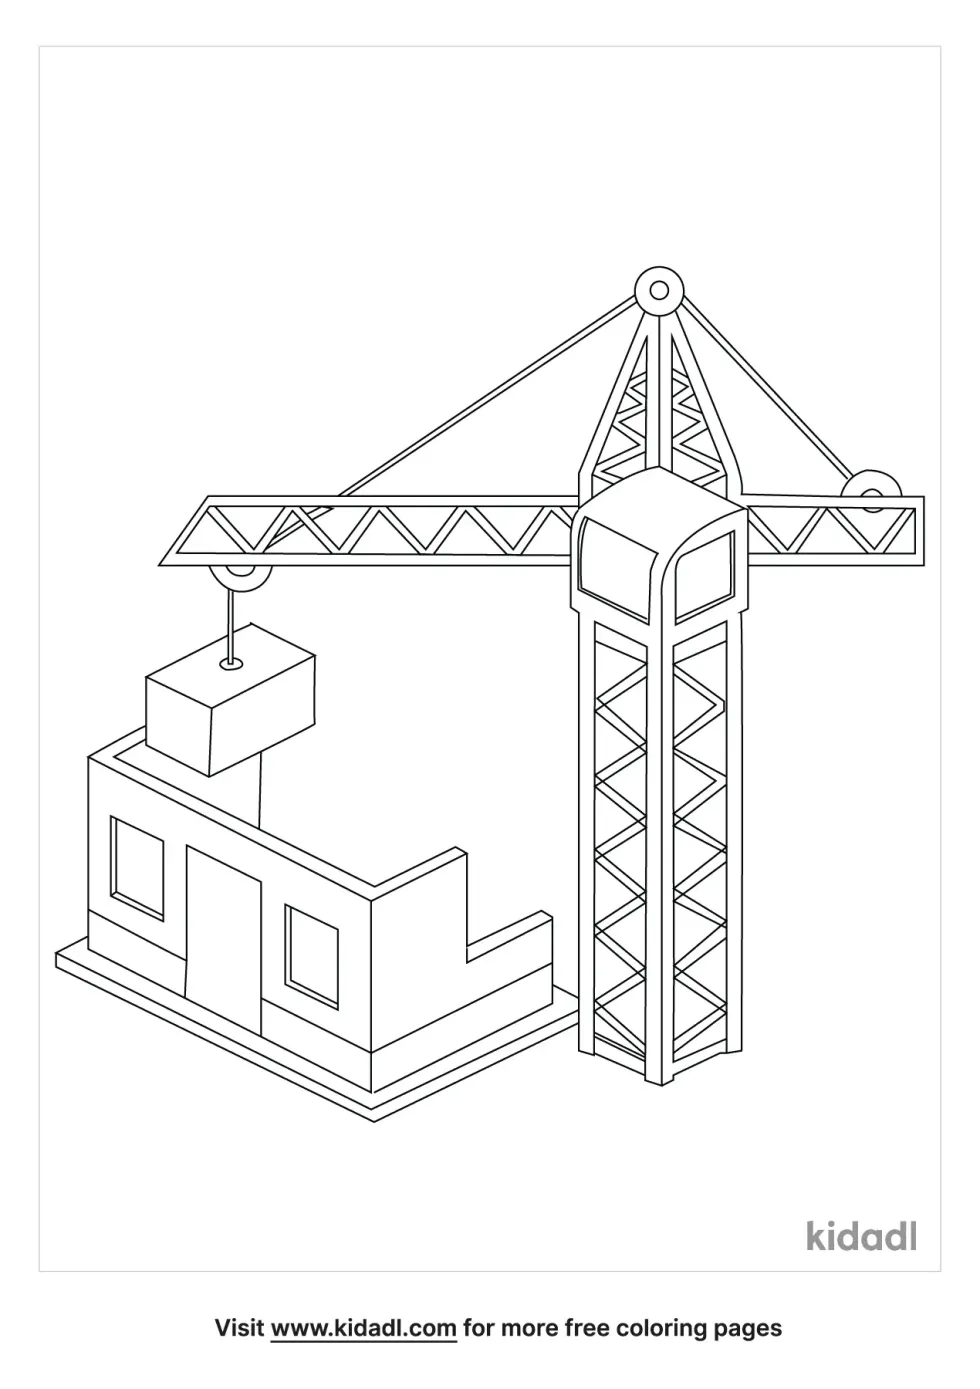 House Building Coloring Page